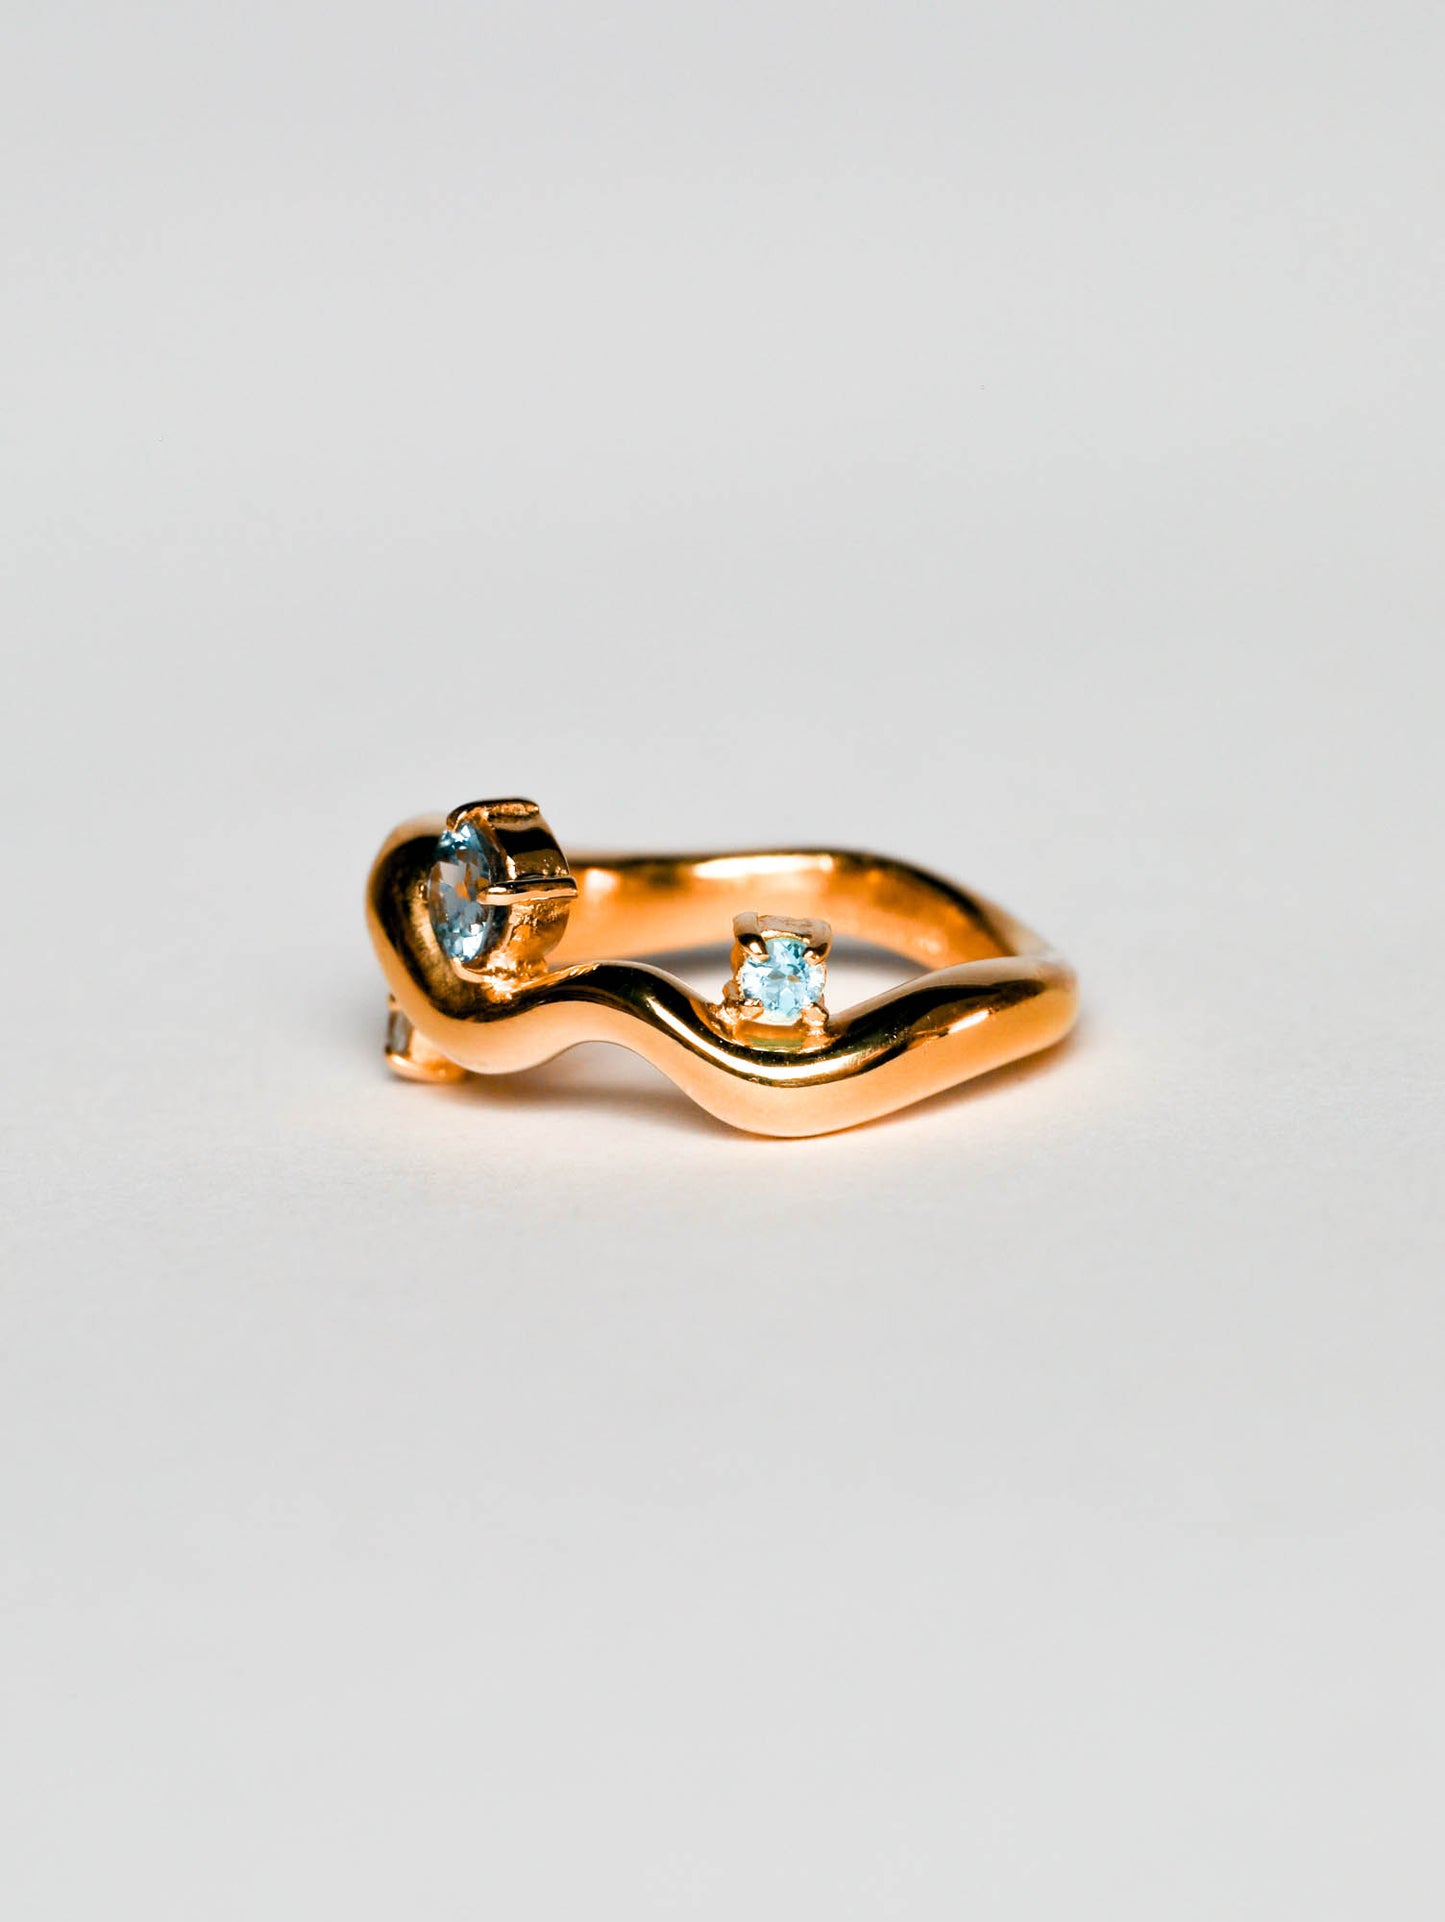 Wave Ring Gold with 3 Sapphire Stones  # 2 | Size 8